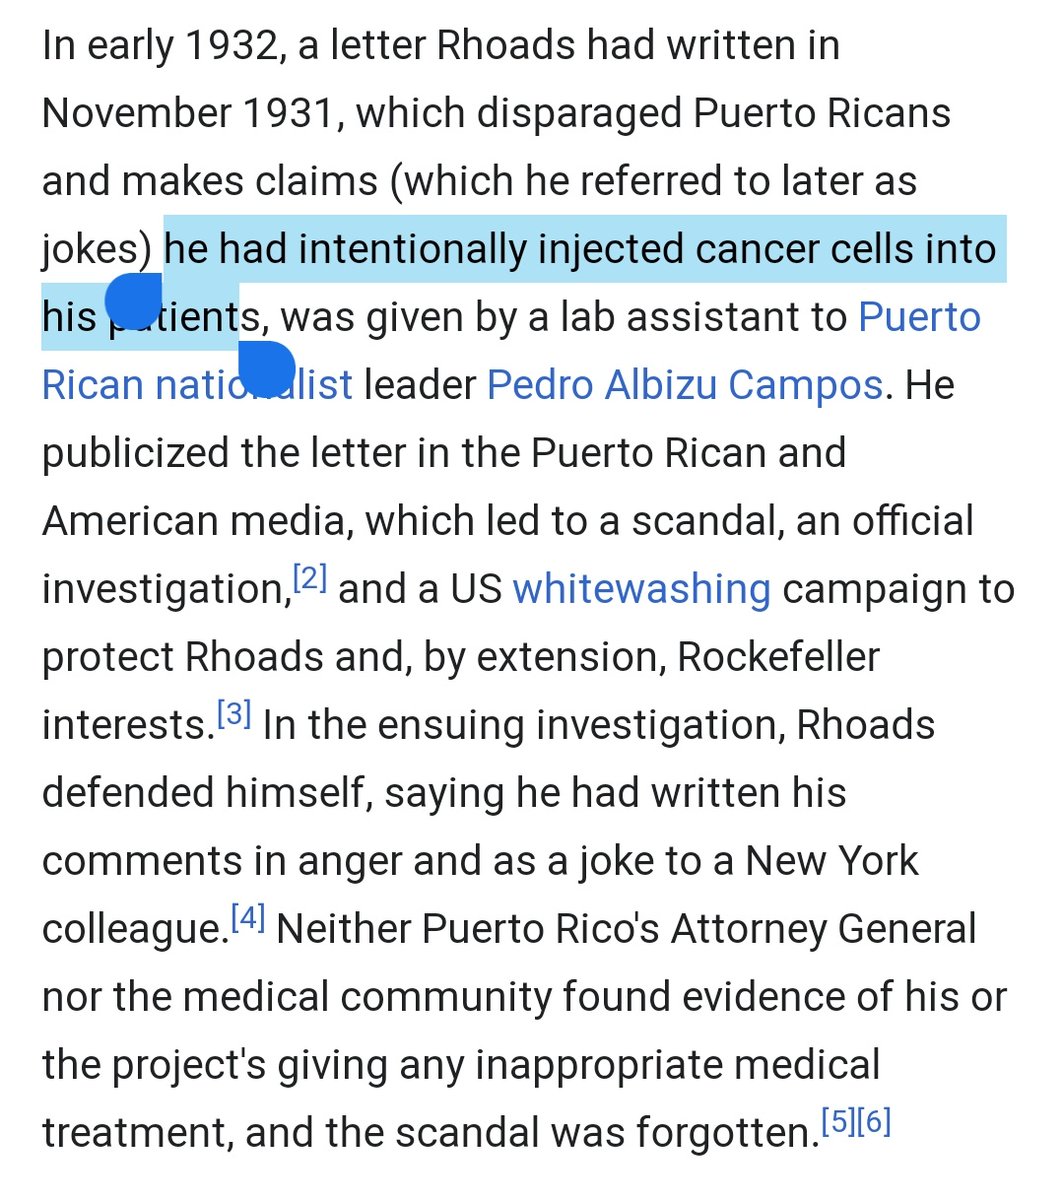 It doesn't feel like anti-science to me. It feels more like distrust of a medical solution when BIPOC/POC have been lab rats in the past.In PR, they tested the Birth Control/Sterilization without consent. A man hailed as hero claimed he "joked" of injecting people with cancer.